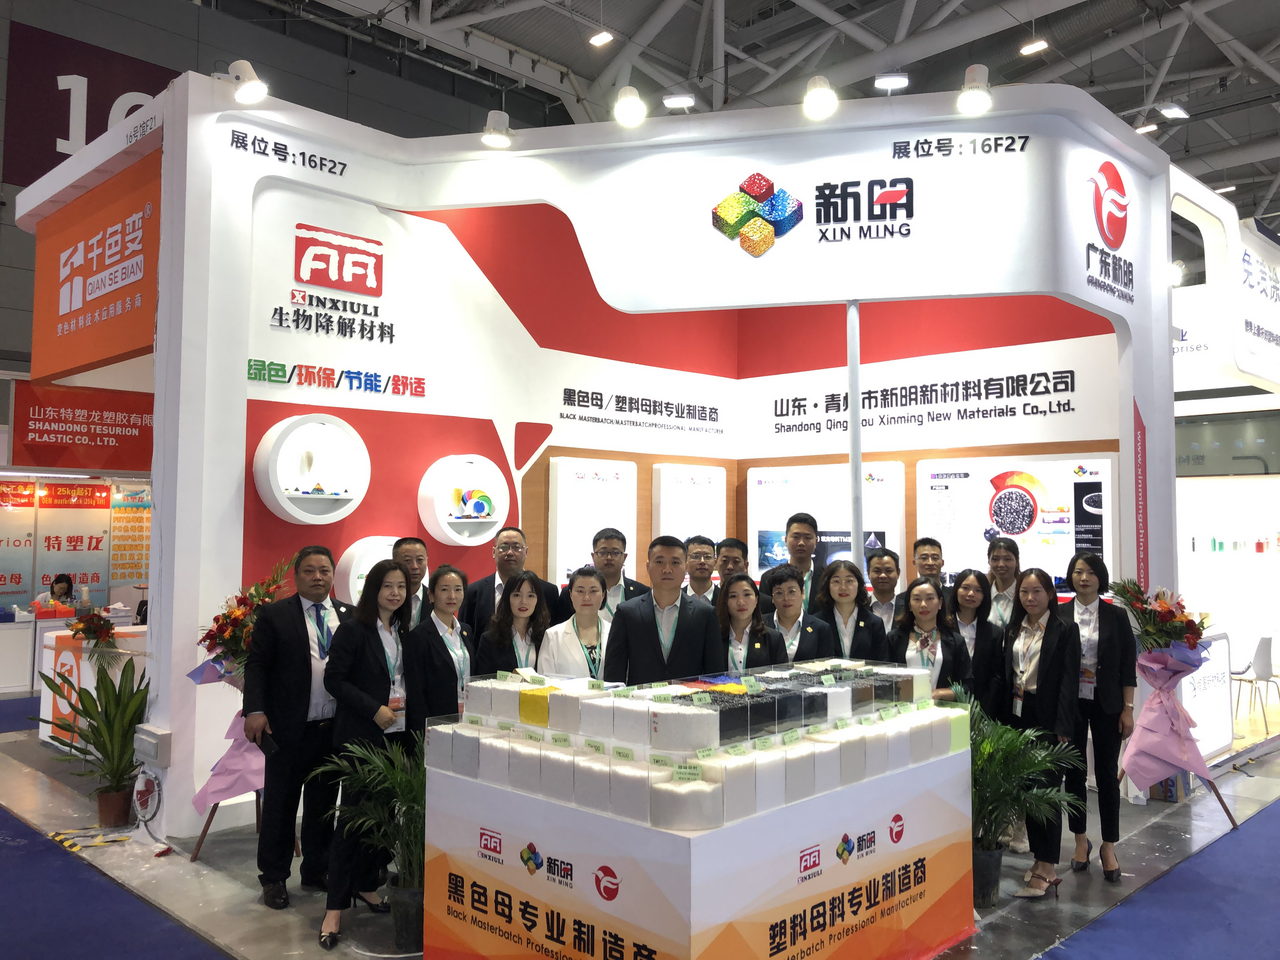 The 34th International Rubber and Plastics Exhibition in Shenzhen in 2021